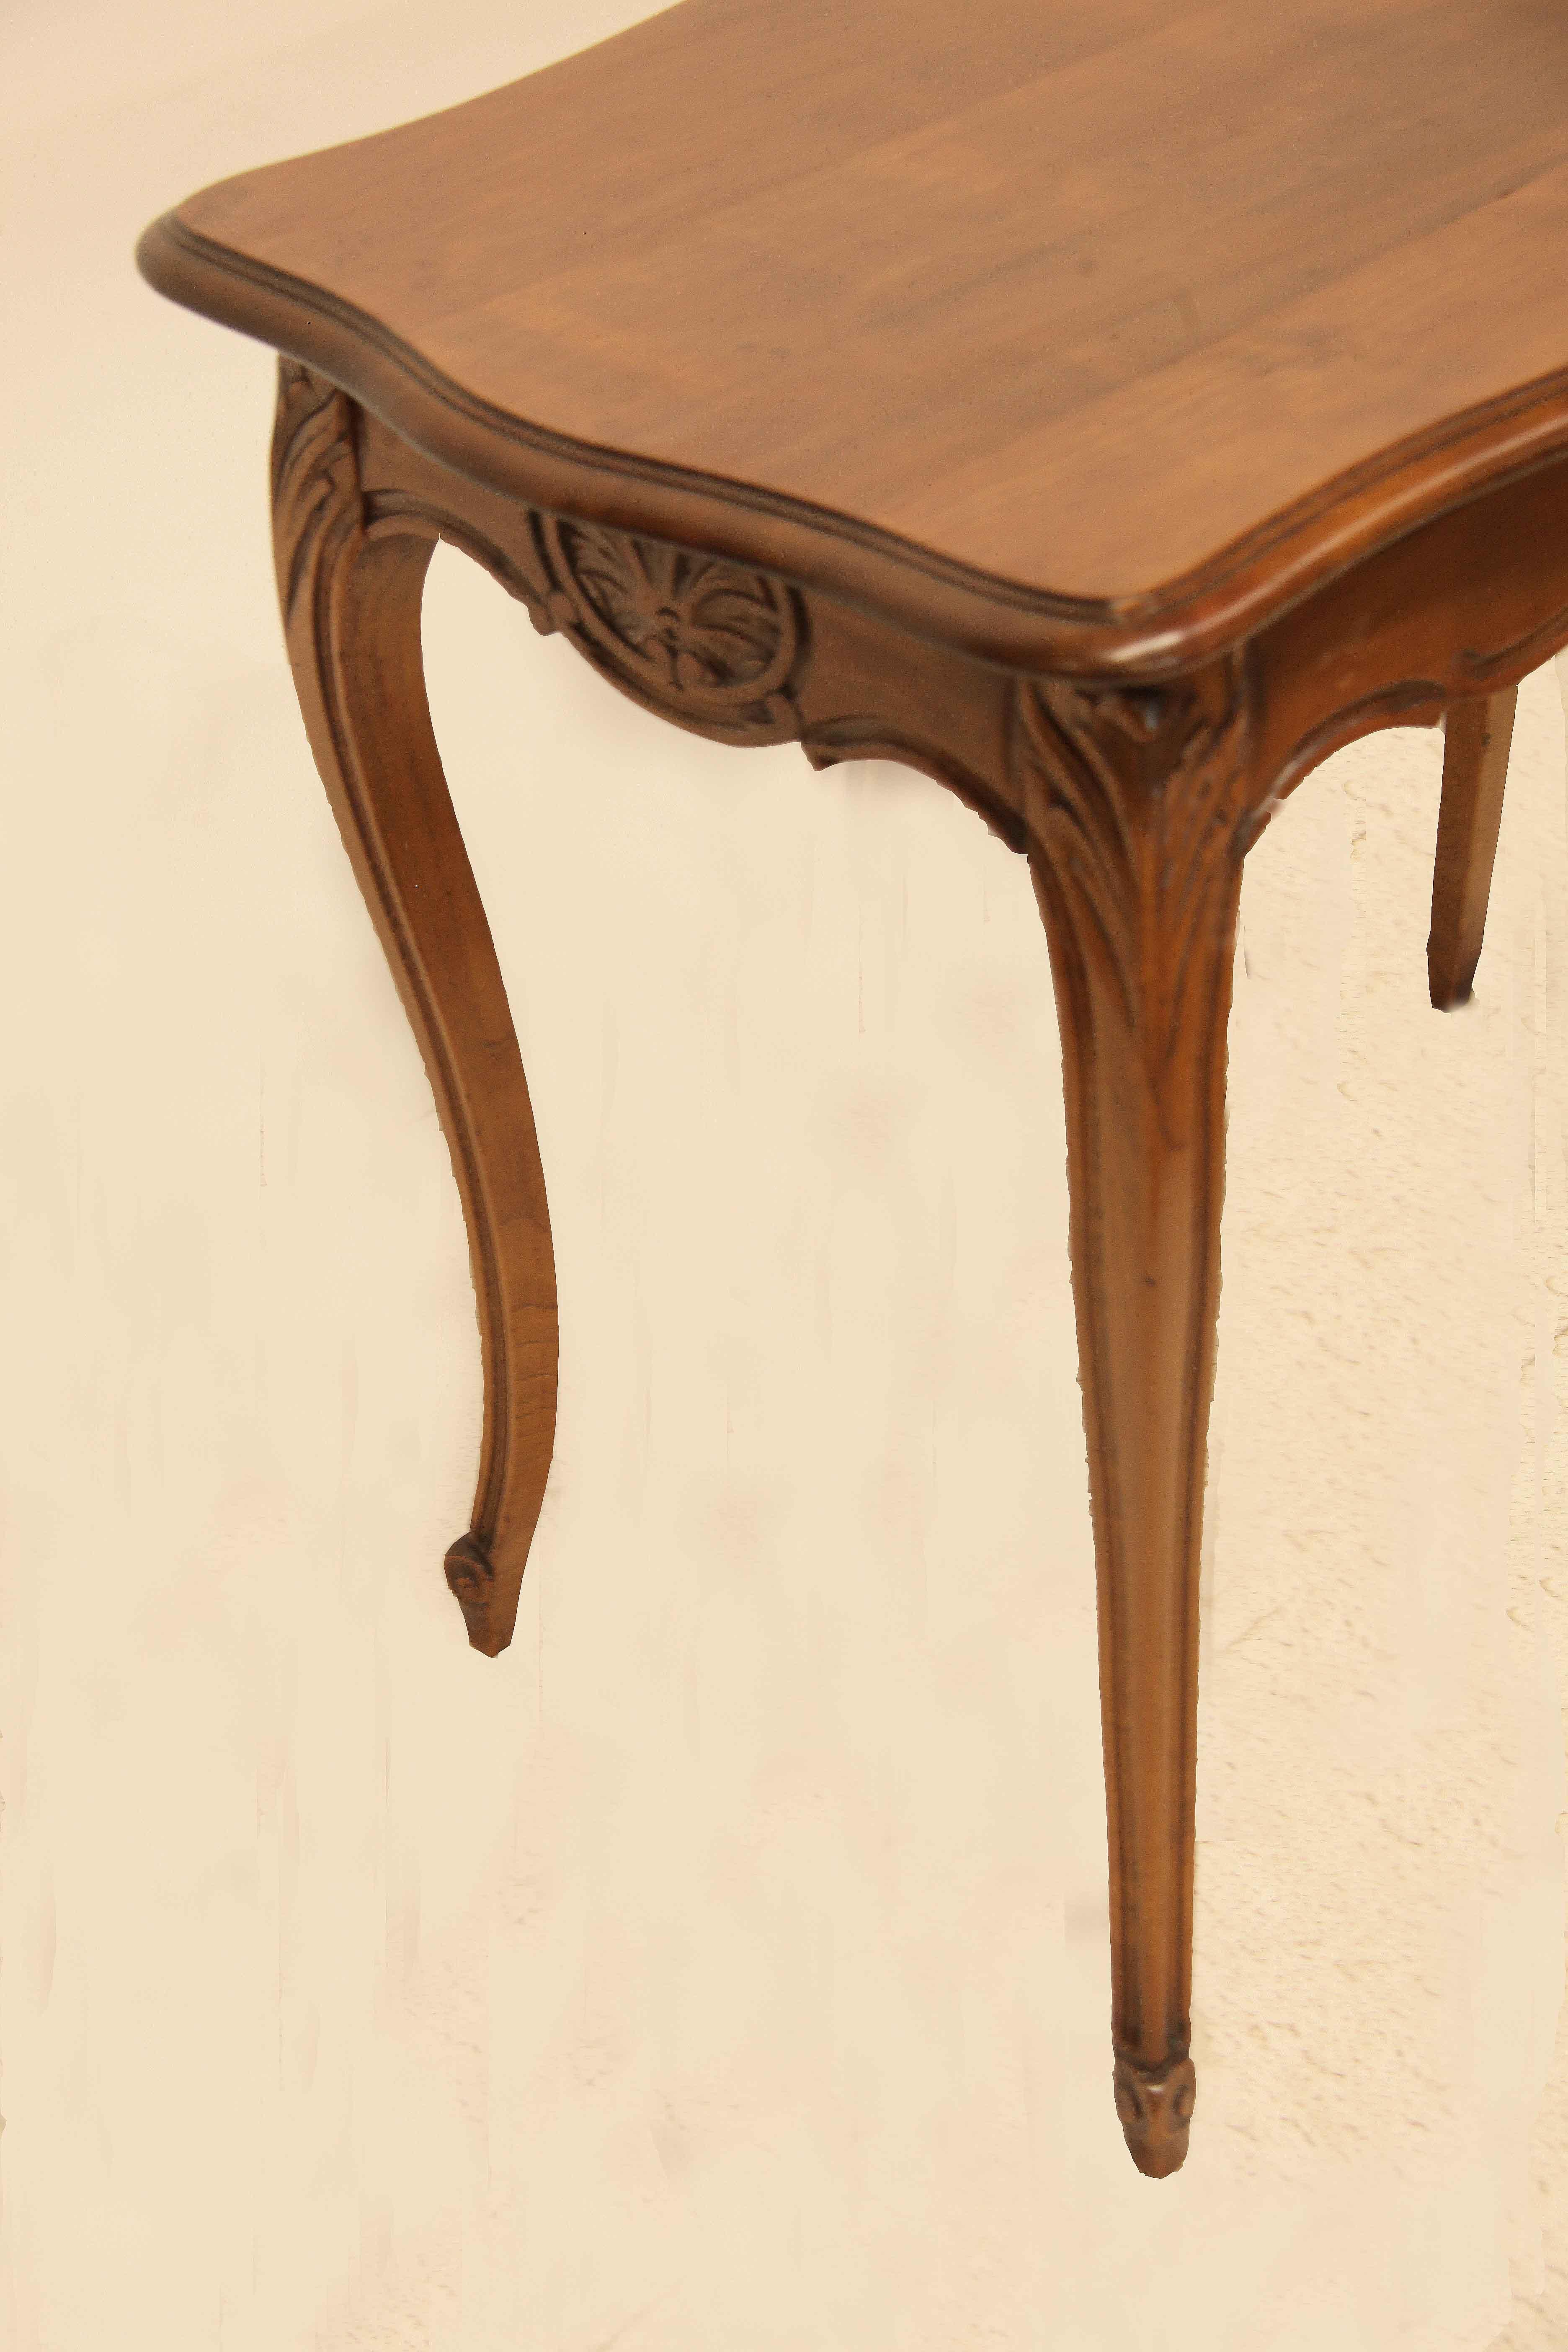 French cherry center table, the serpentine shape front and sides each have a central carved medallion, the top has a beautiful color and patina with continuous molded edge around the perimeter; cabriole legs with acanthus carved knees and scrolled